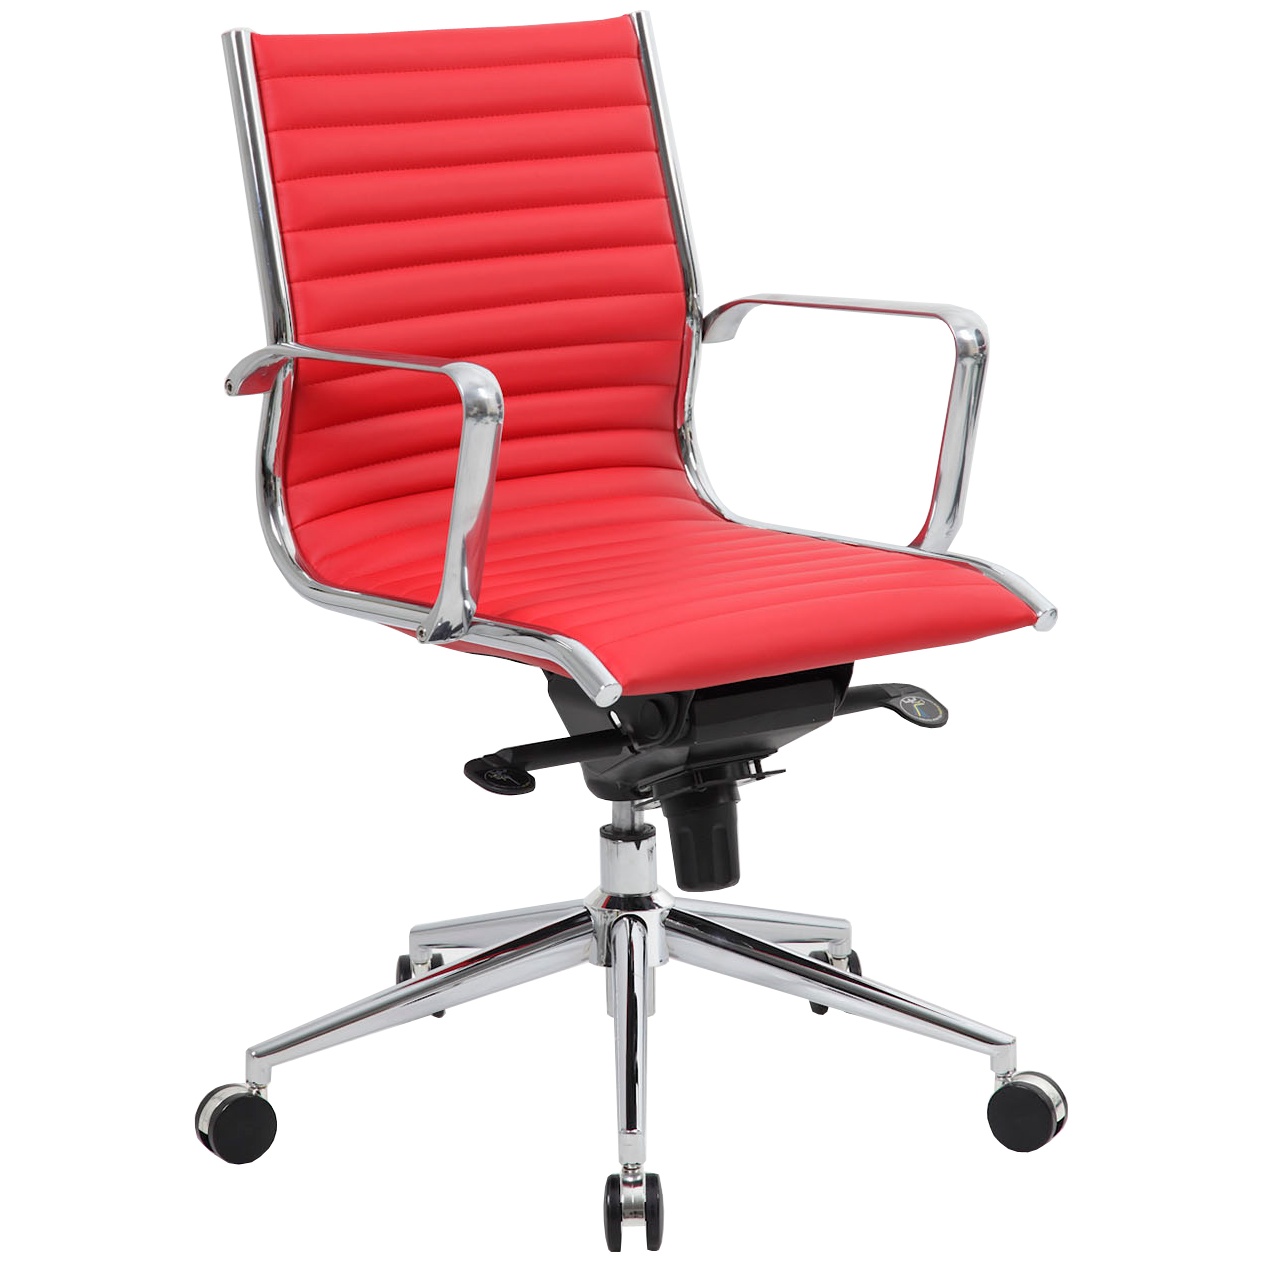 Abbey Medium Back Red Leather Office, Red Leather Computer Chair